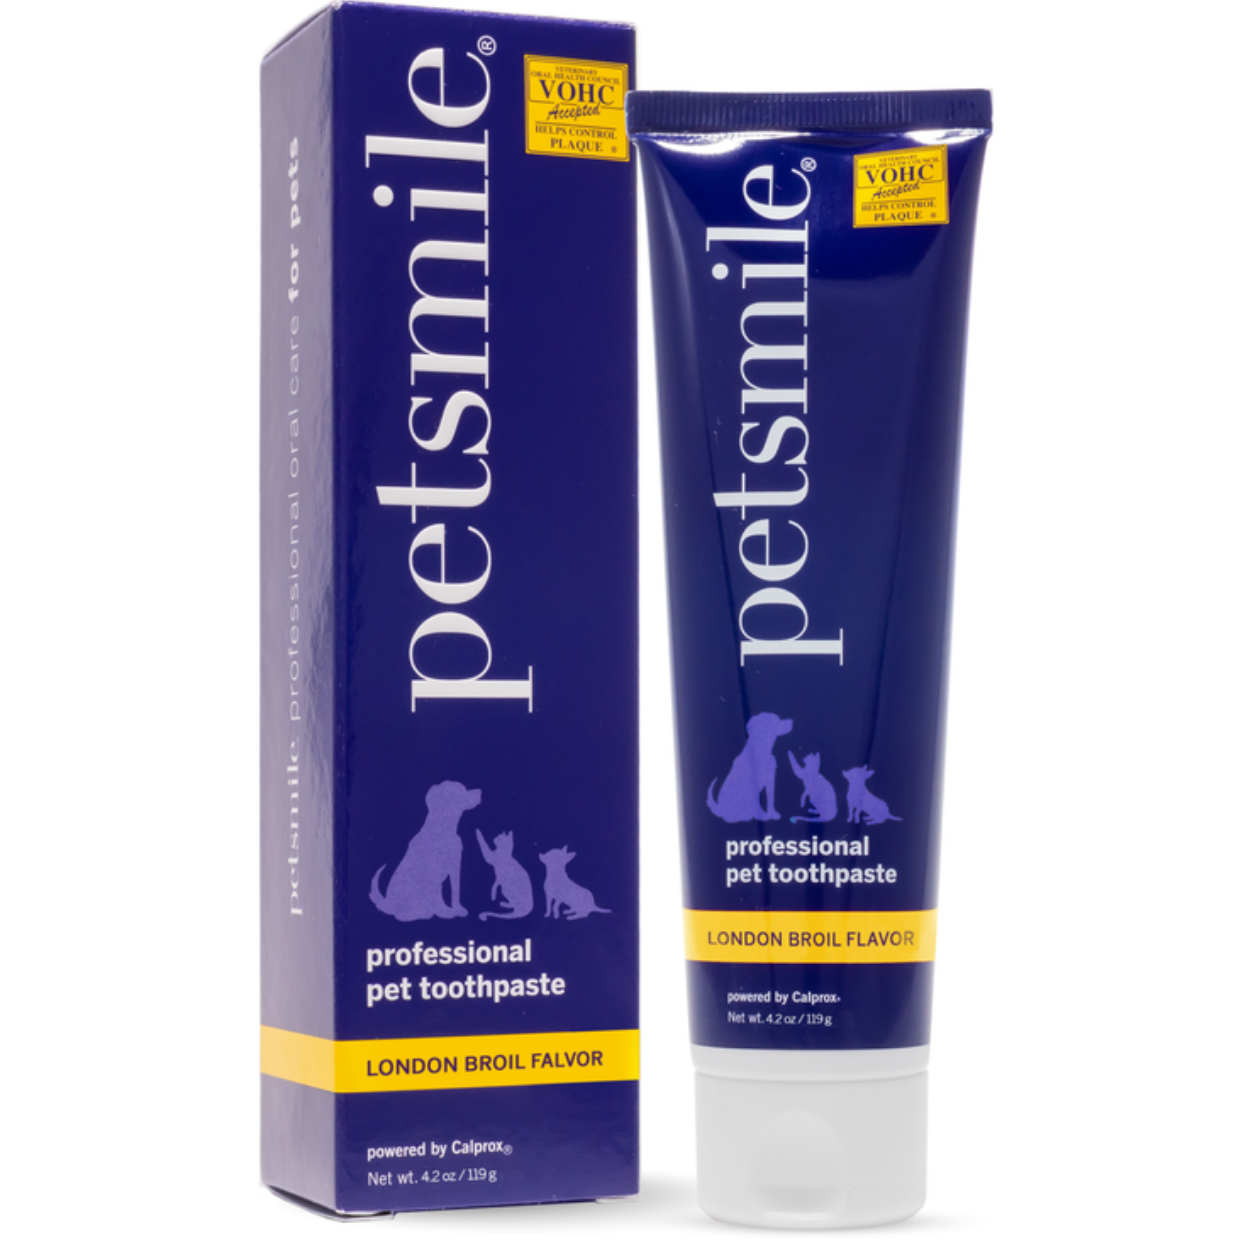 Petsmile Professional Toothpaste For Dog and Cat --Natural London Broil Flavor